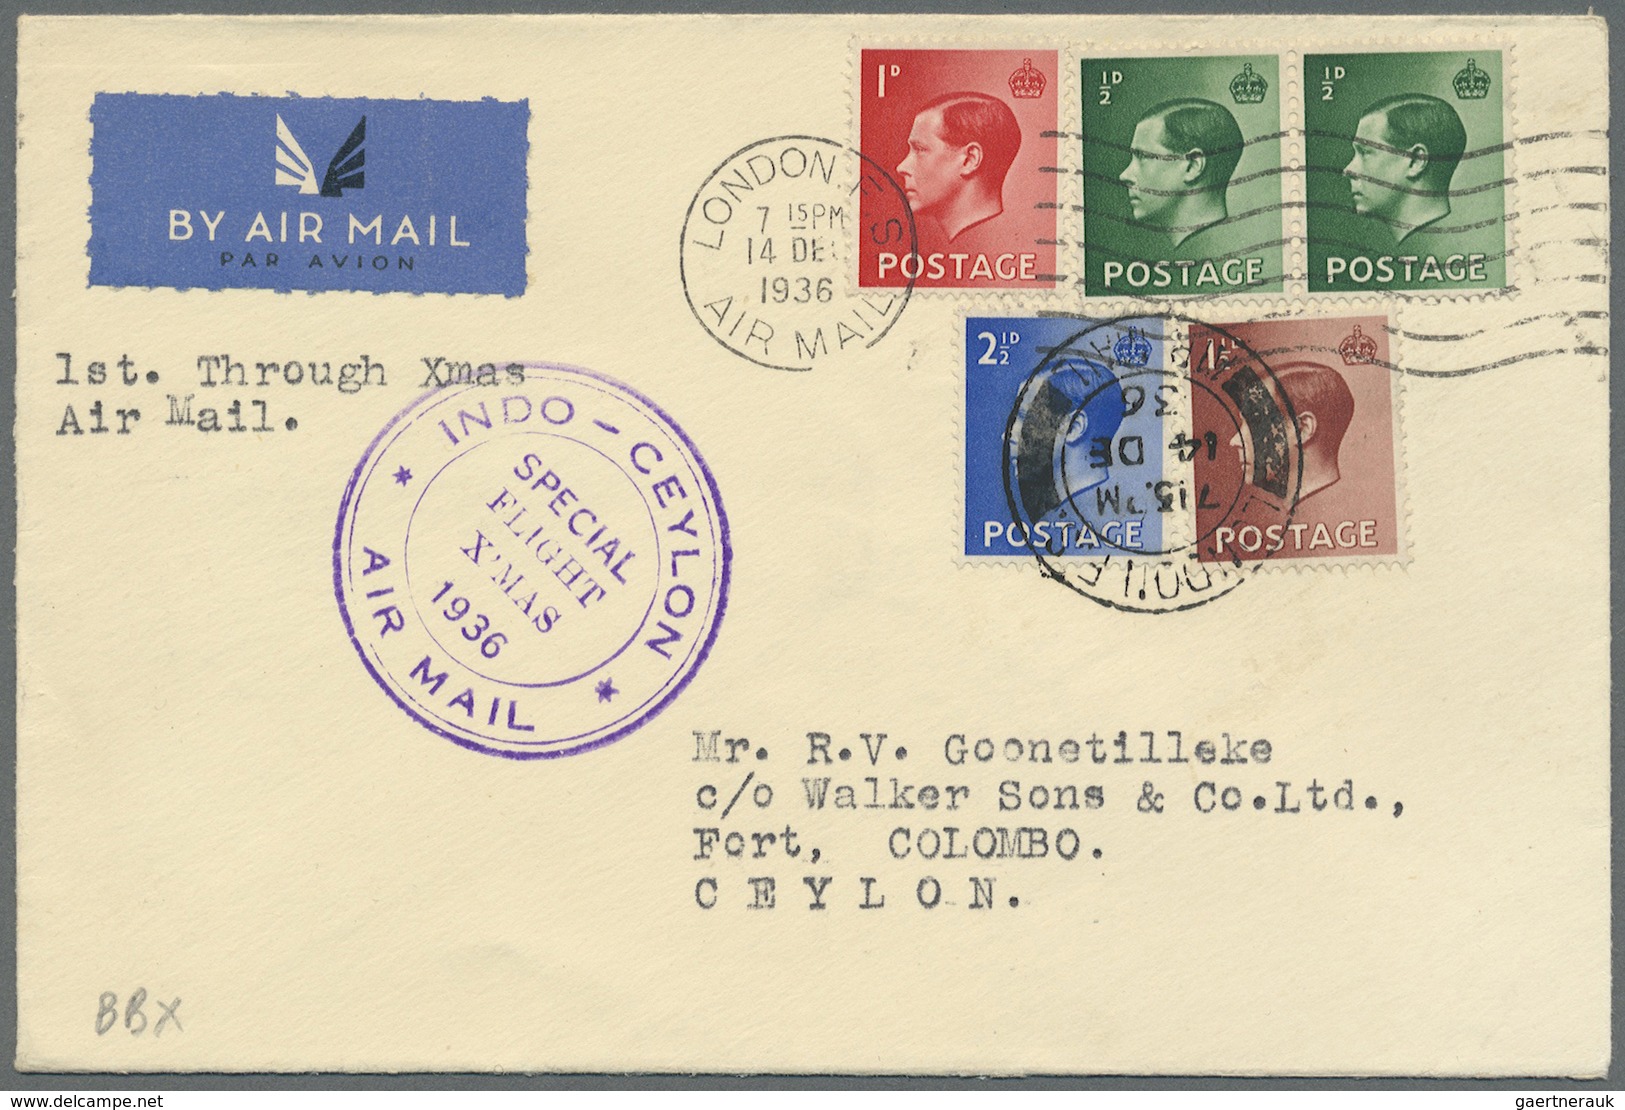 Br/GA Großbritannien: 1911 from, attractive lot of 49 items "AIRMAIL", first and foremost pre WWII covers